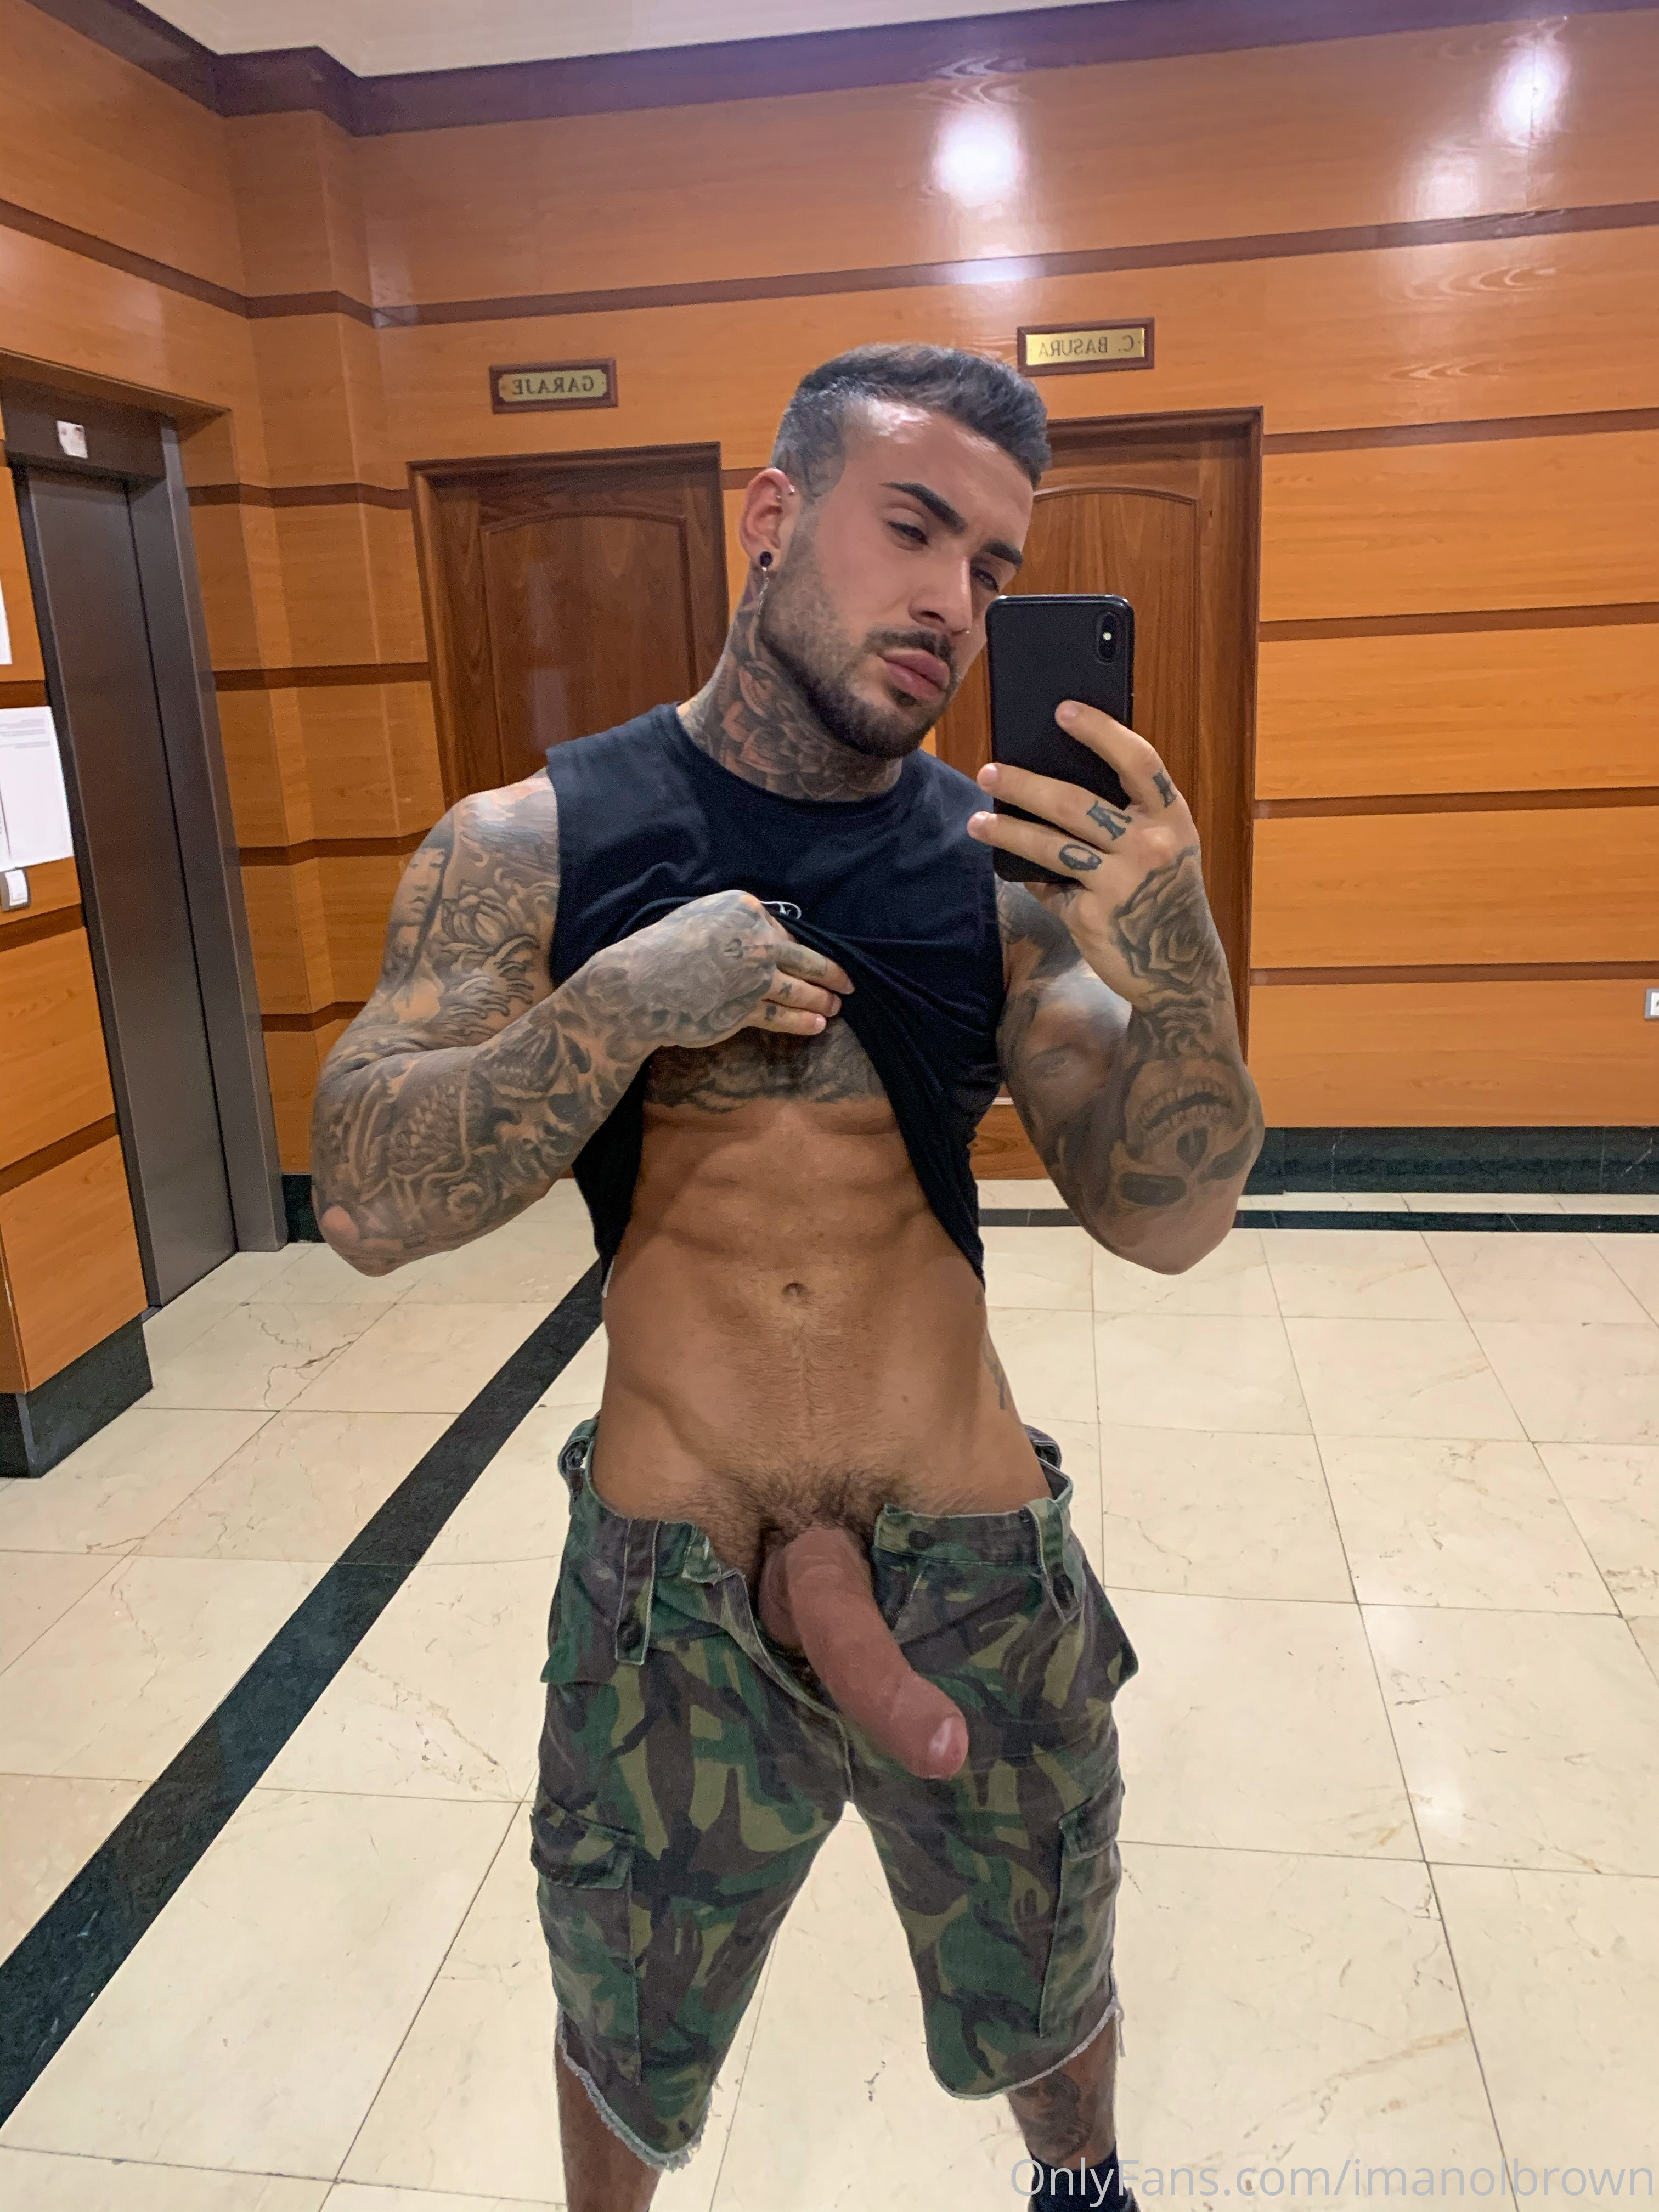 Only Fans - Imanol Brown.